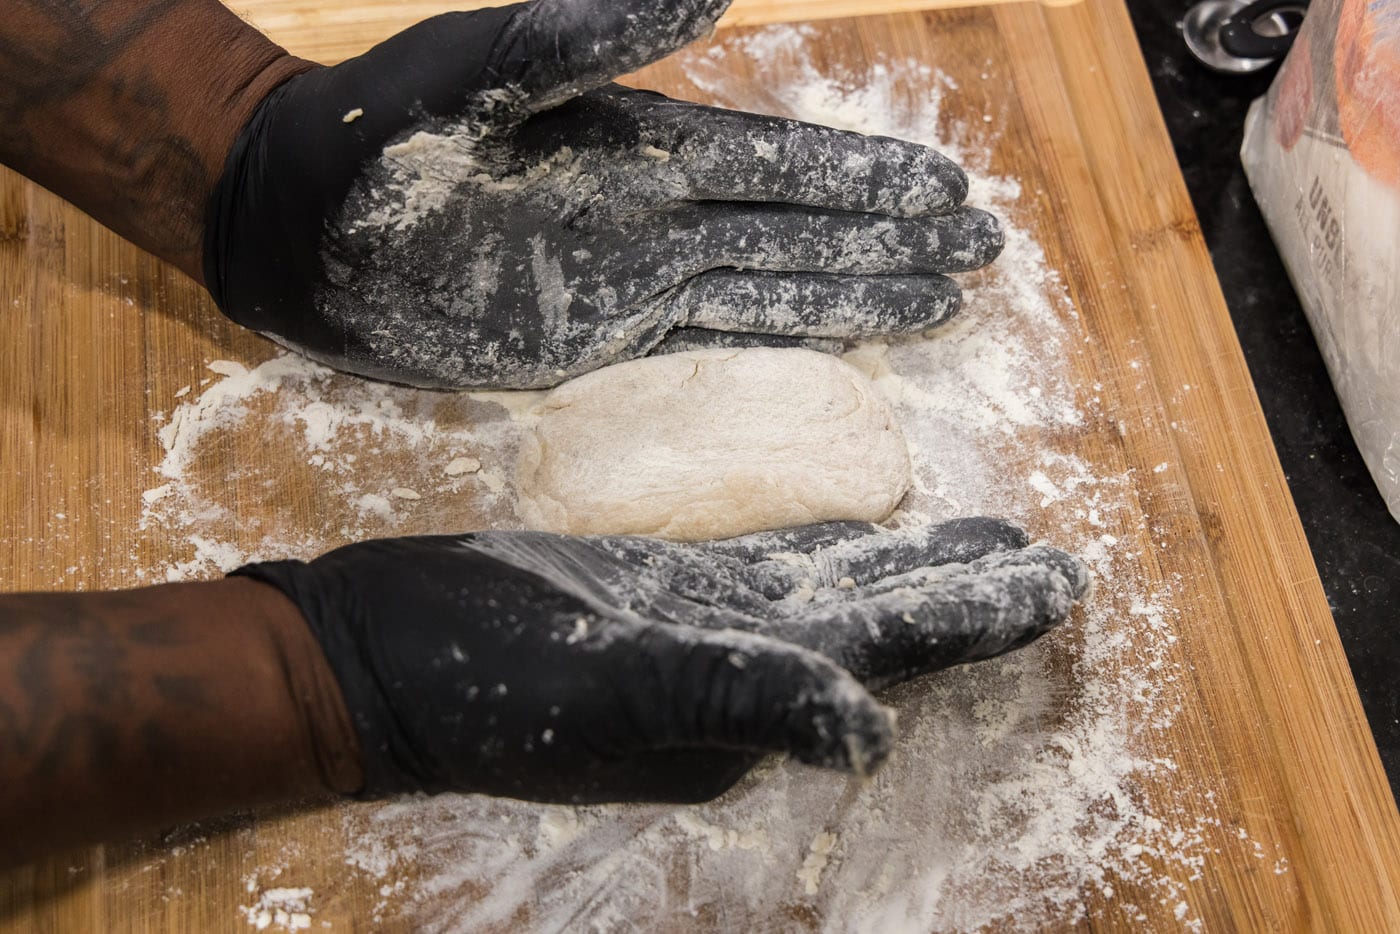 shaping fish cake dough with gloved hands